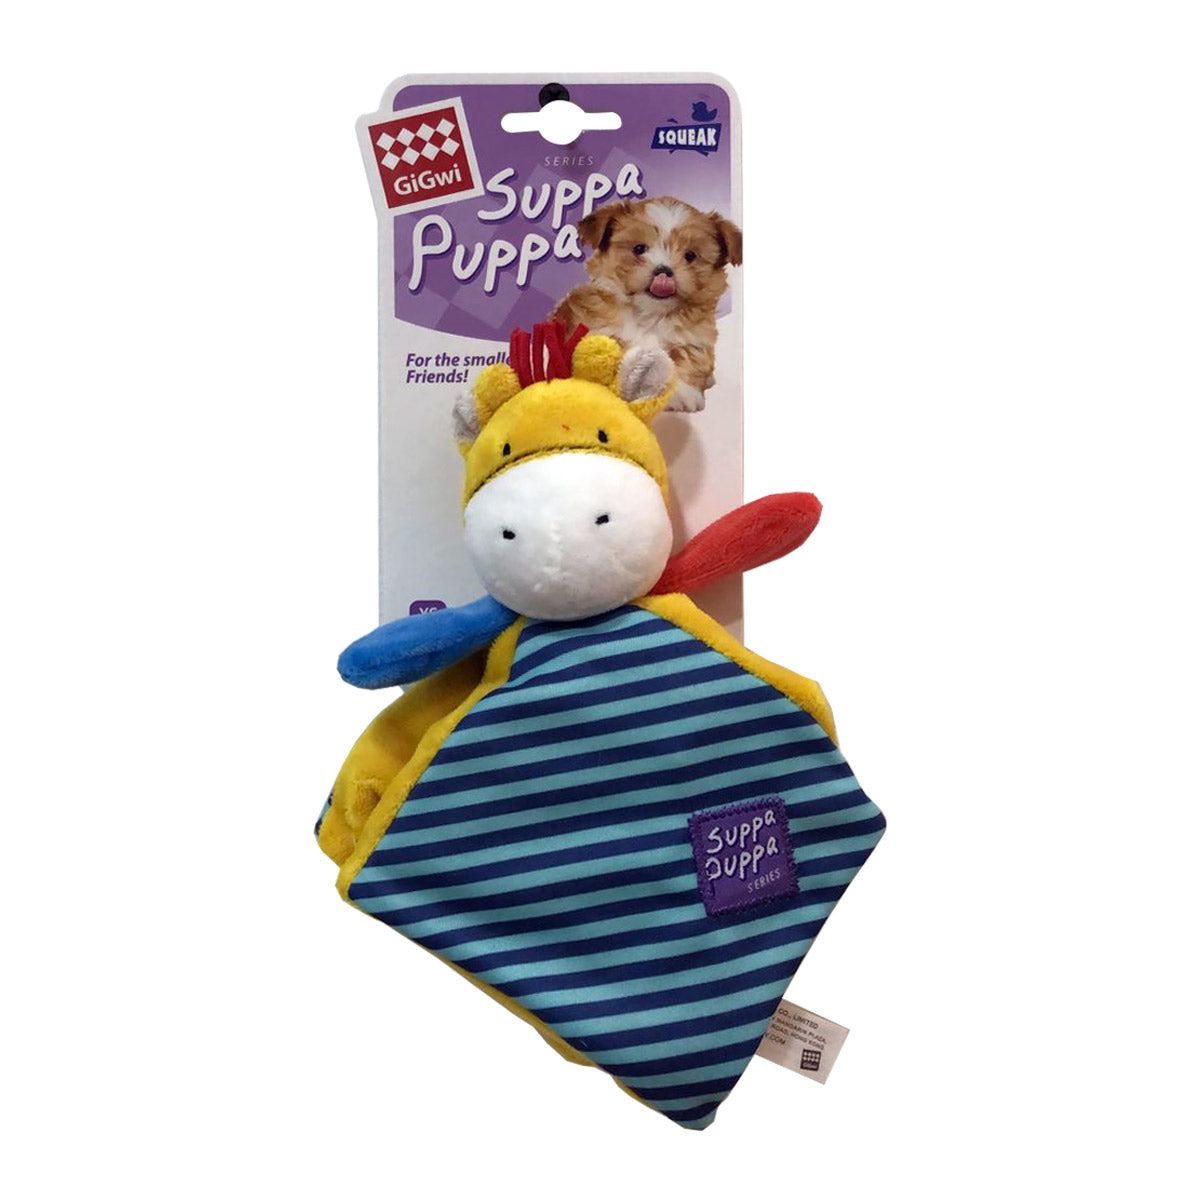 Gigwi Suppa Puppa Deer with Squeaker & Crinkle XS